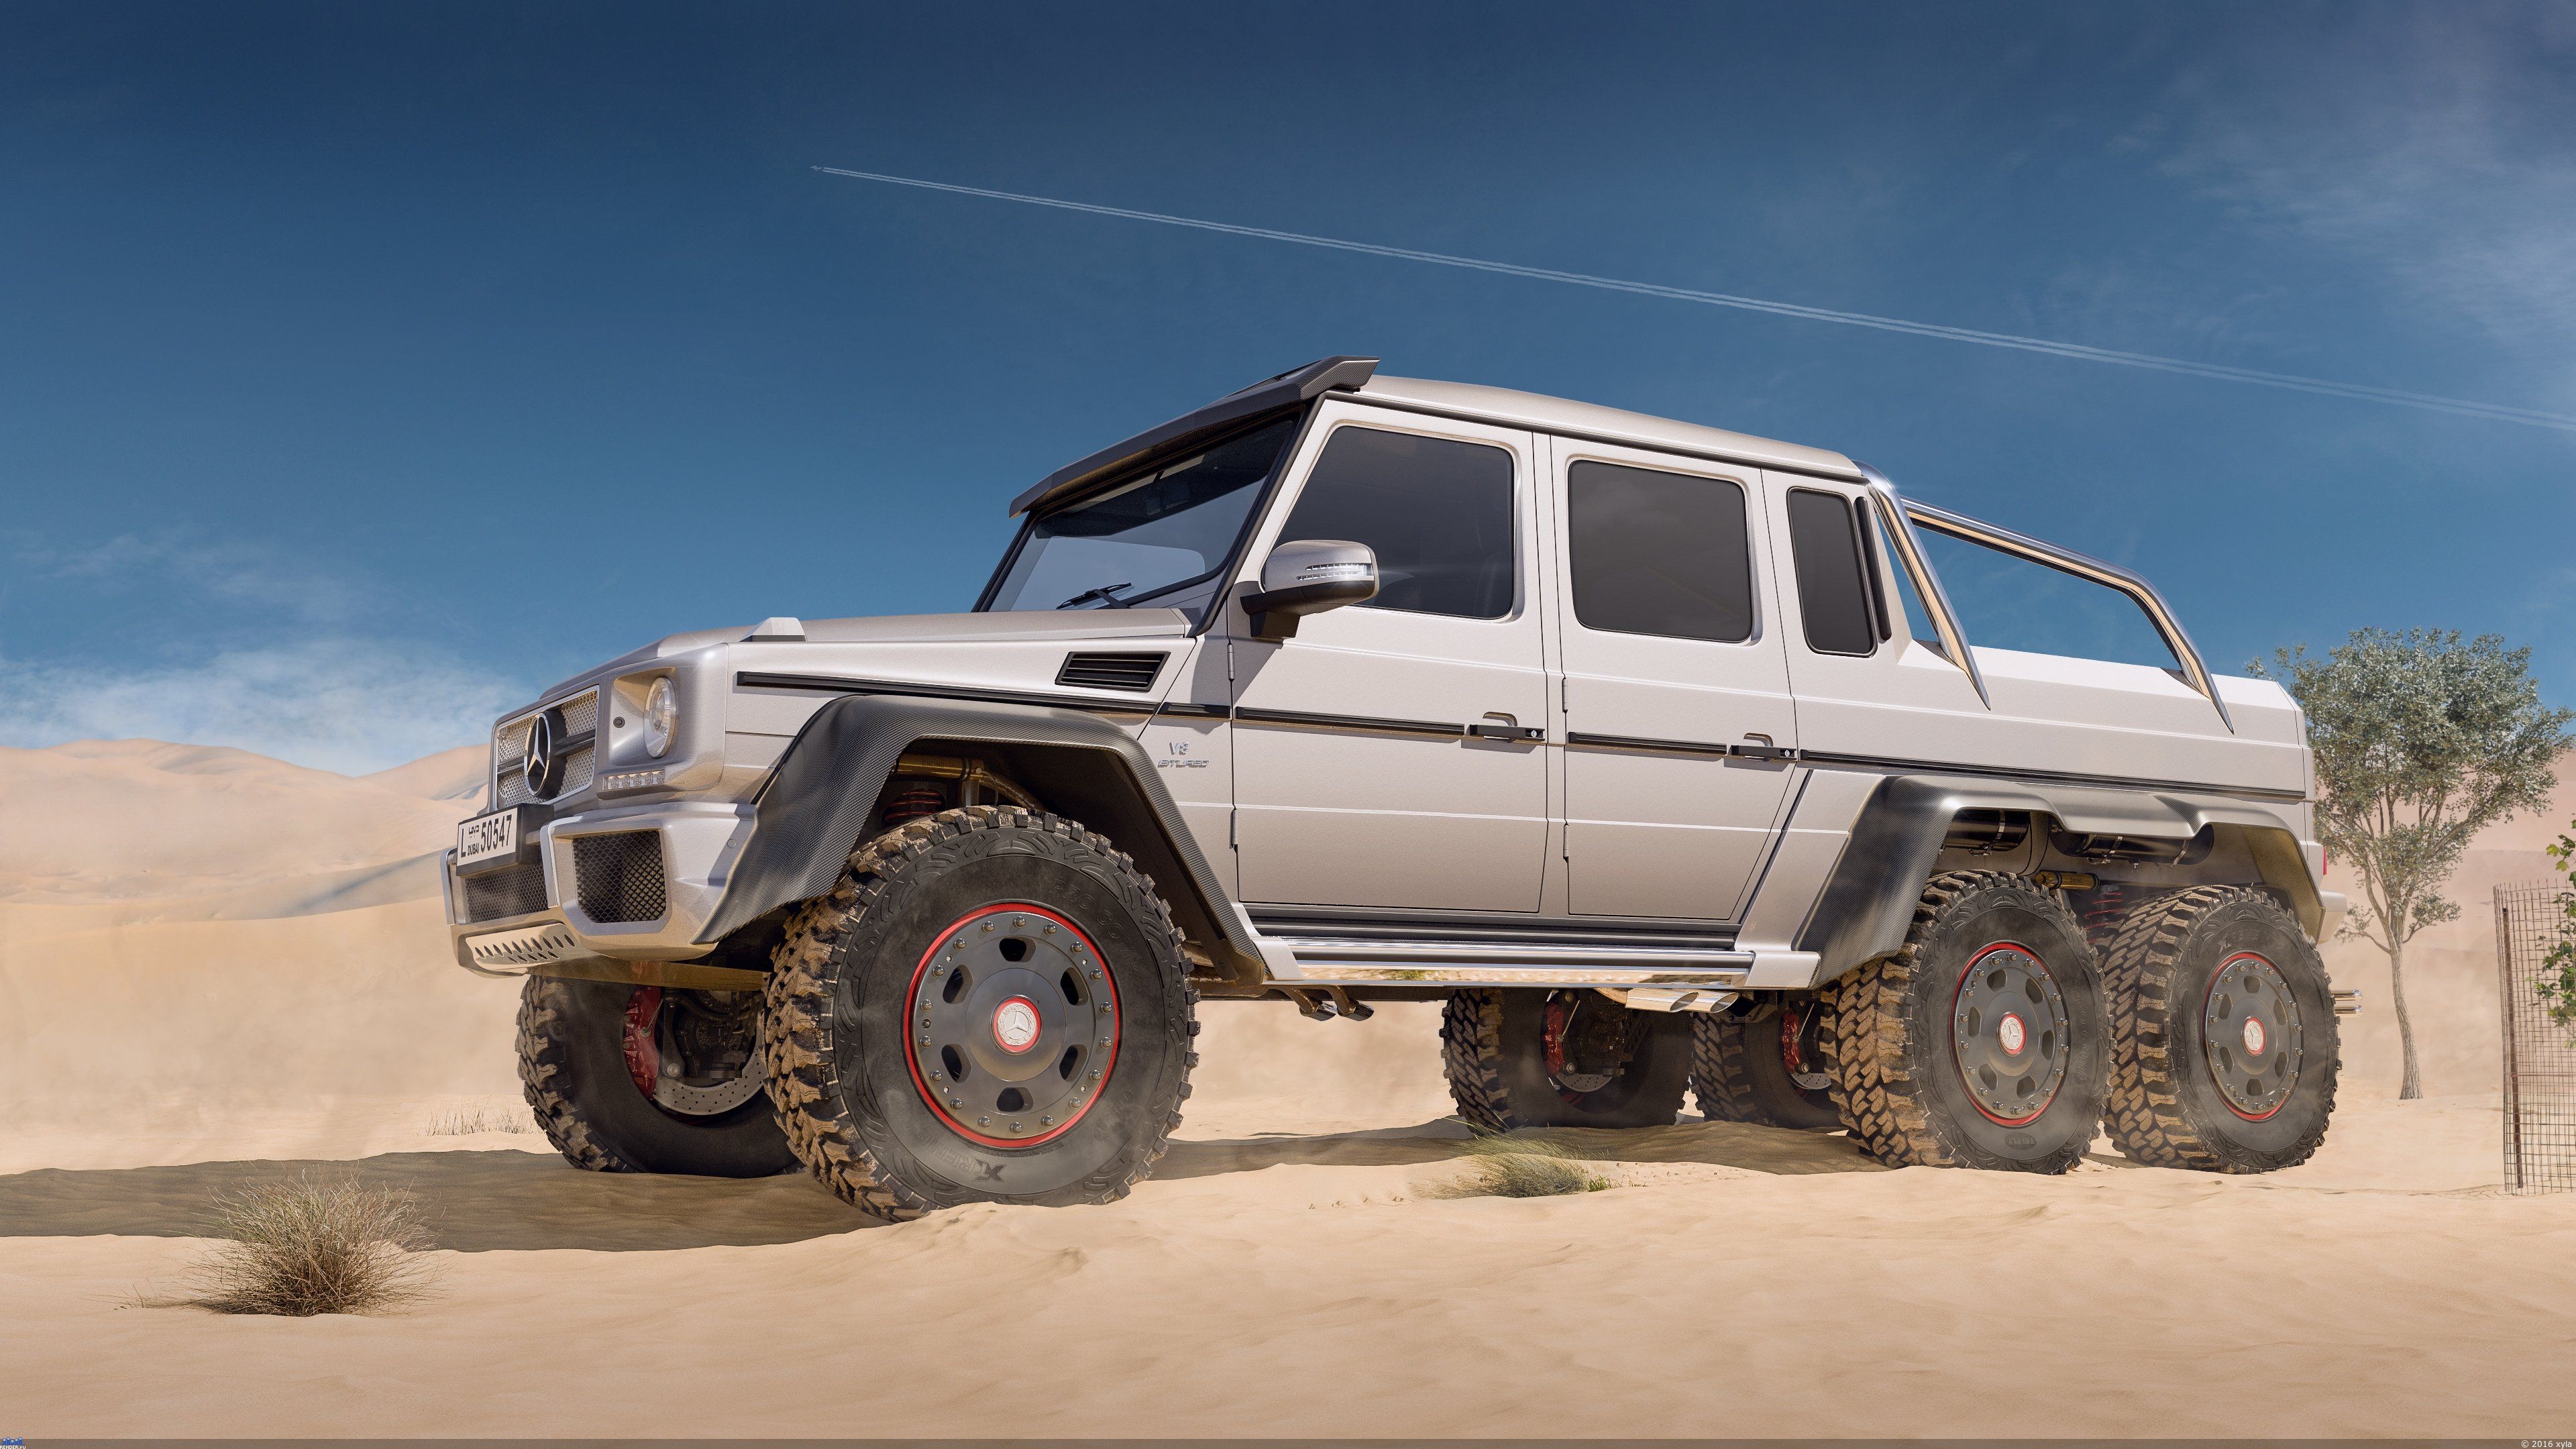 Mercedes Benz AMG G63 6x6, HD Cars, 4k Wallpapers, Image, Backgrounds, Photos and Pictures